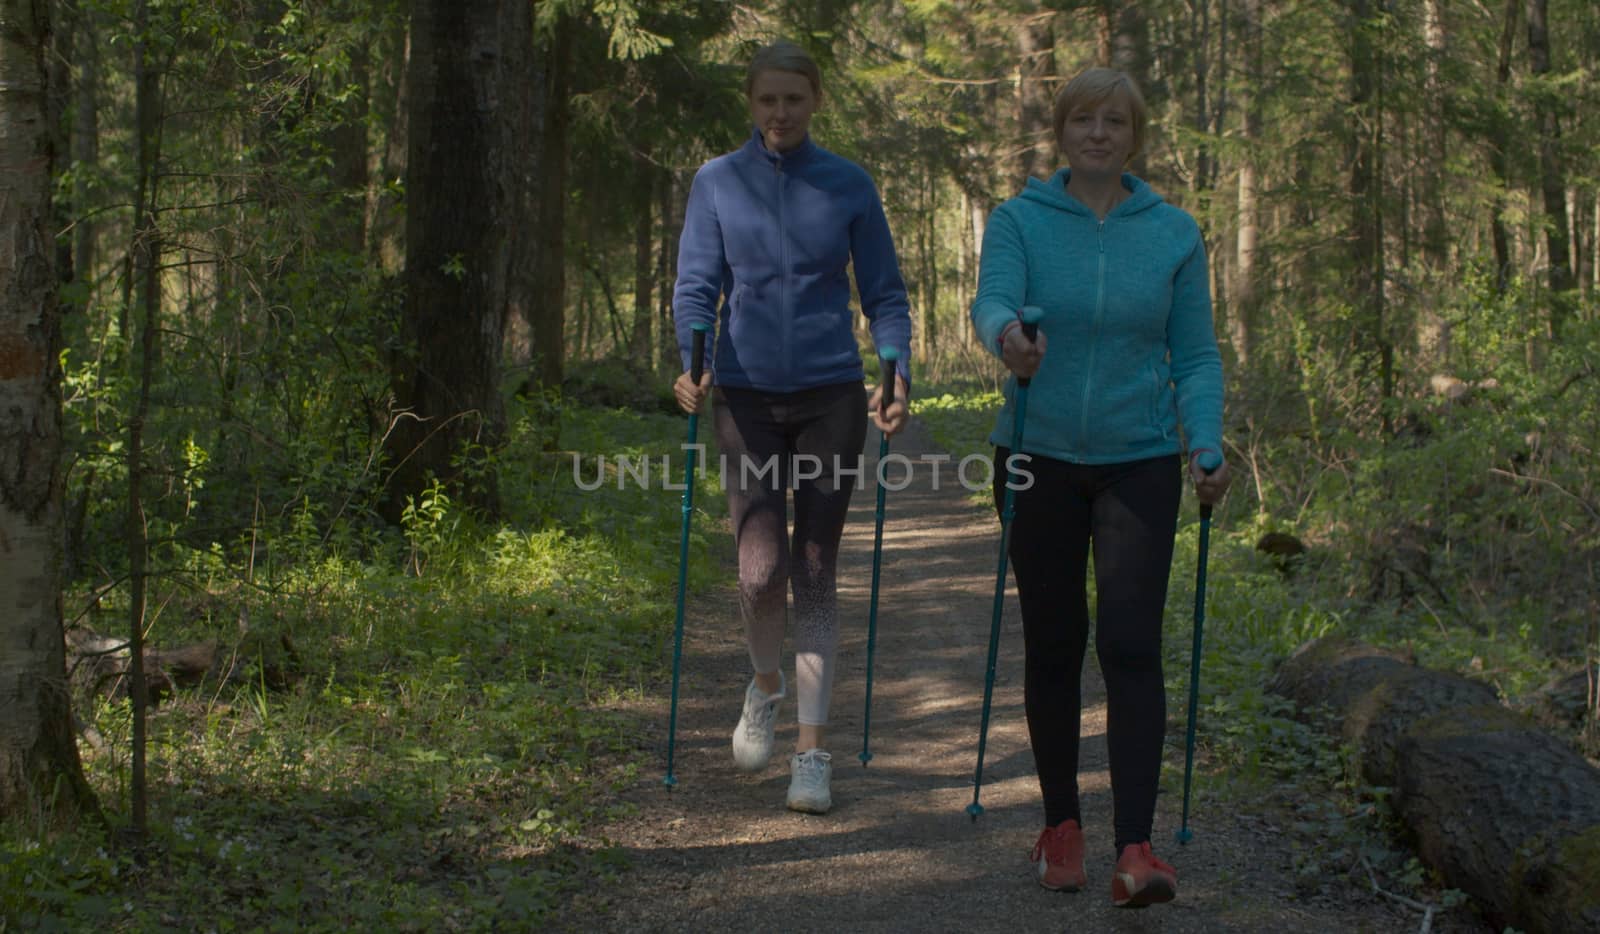 Nordic walking in spring forest. Women with trekking poles hiking by the dirt road. Active and healthy lifestyle concept